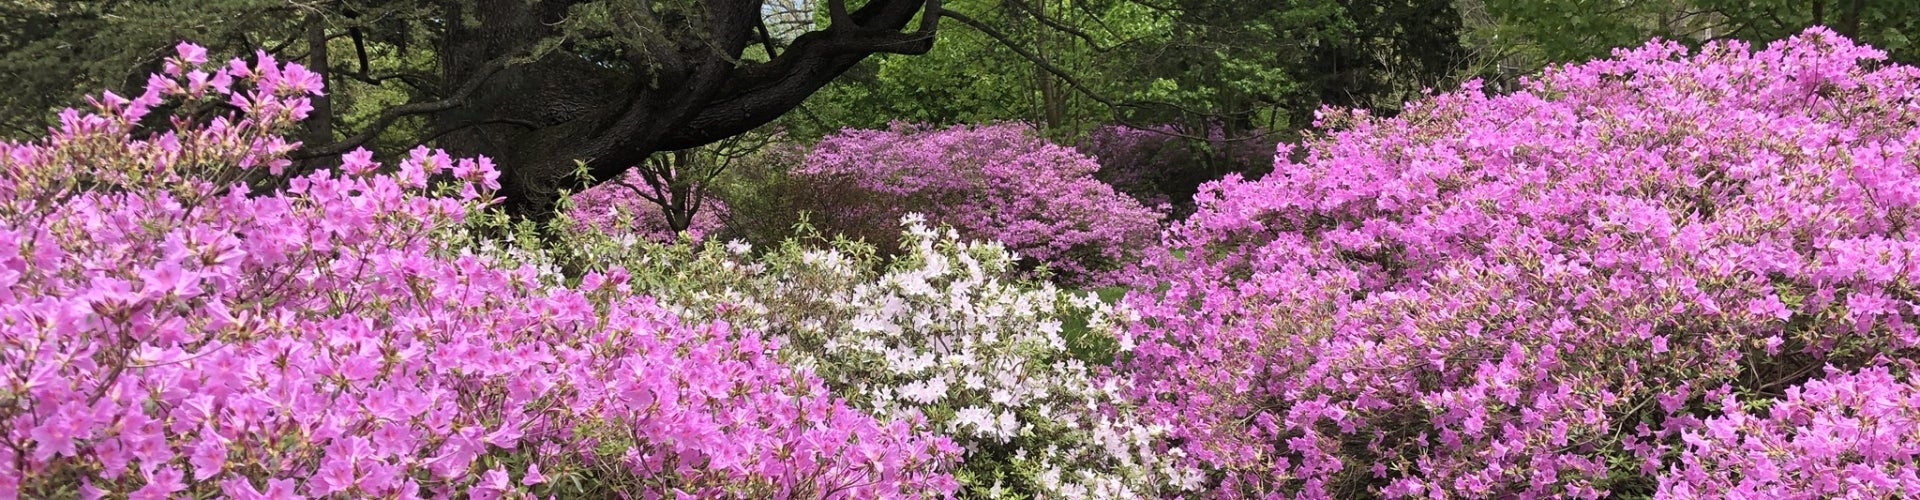 Pink and white azalea bushes in bloom.